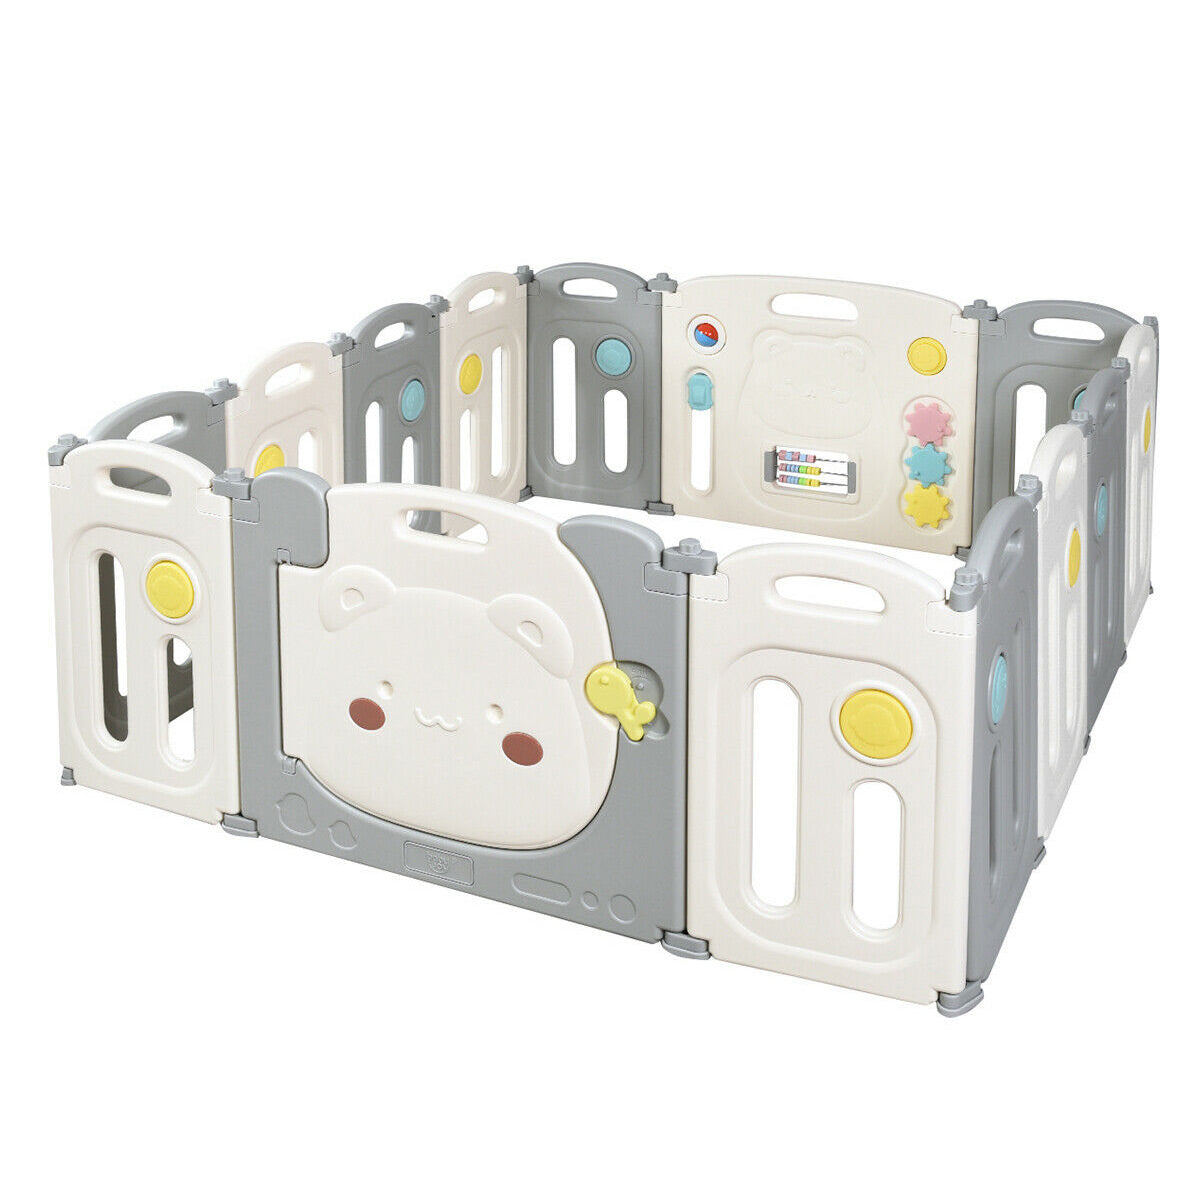 14-Panel Foldable Baby Playpen Safety Yard with Storage Bag - Color: Gray & White